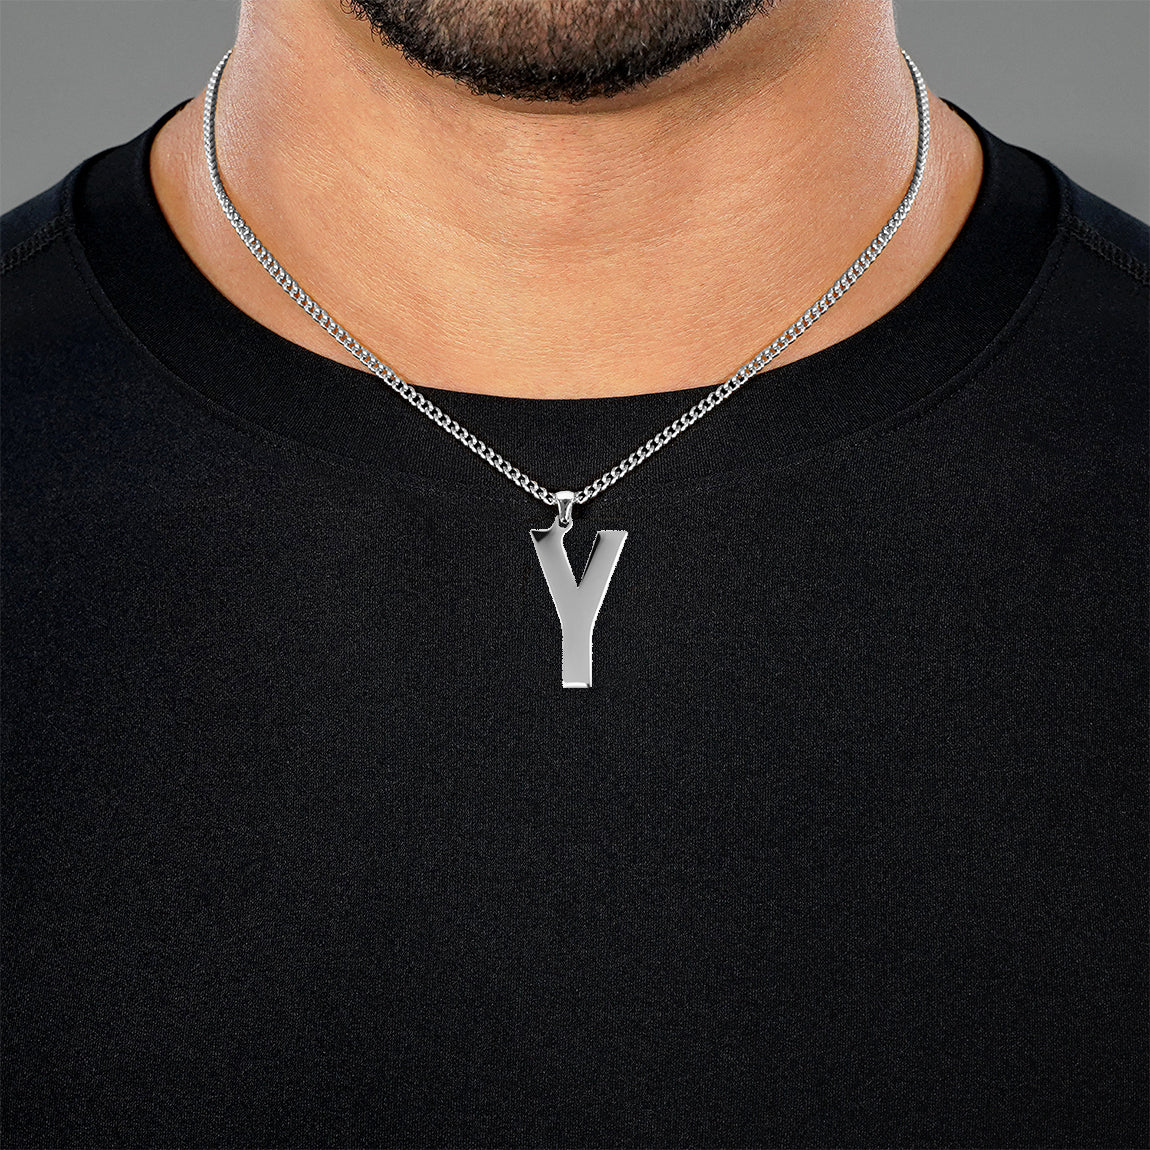 Y Letter Pendant with Chain Necklace - Stainless Steel